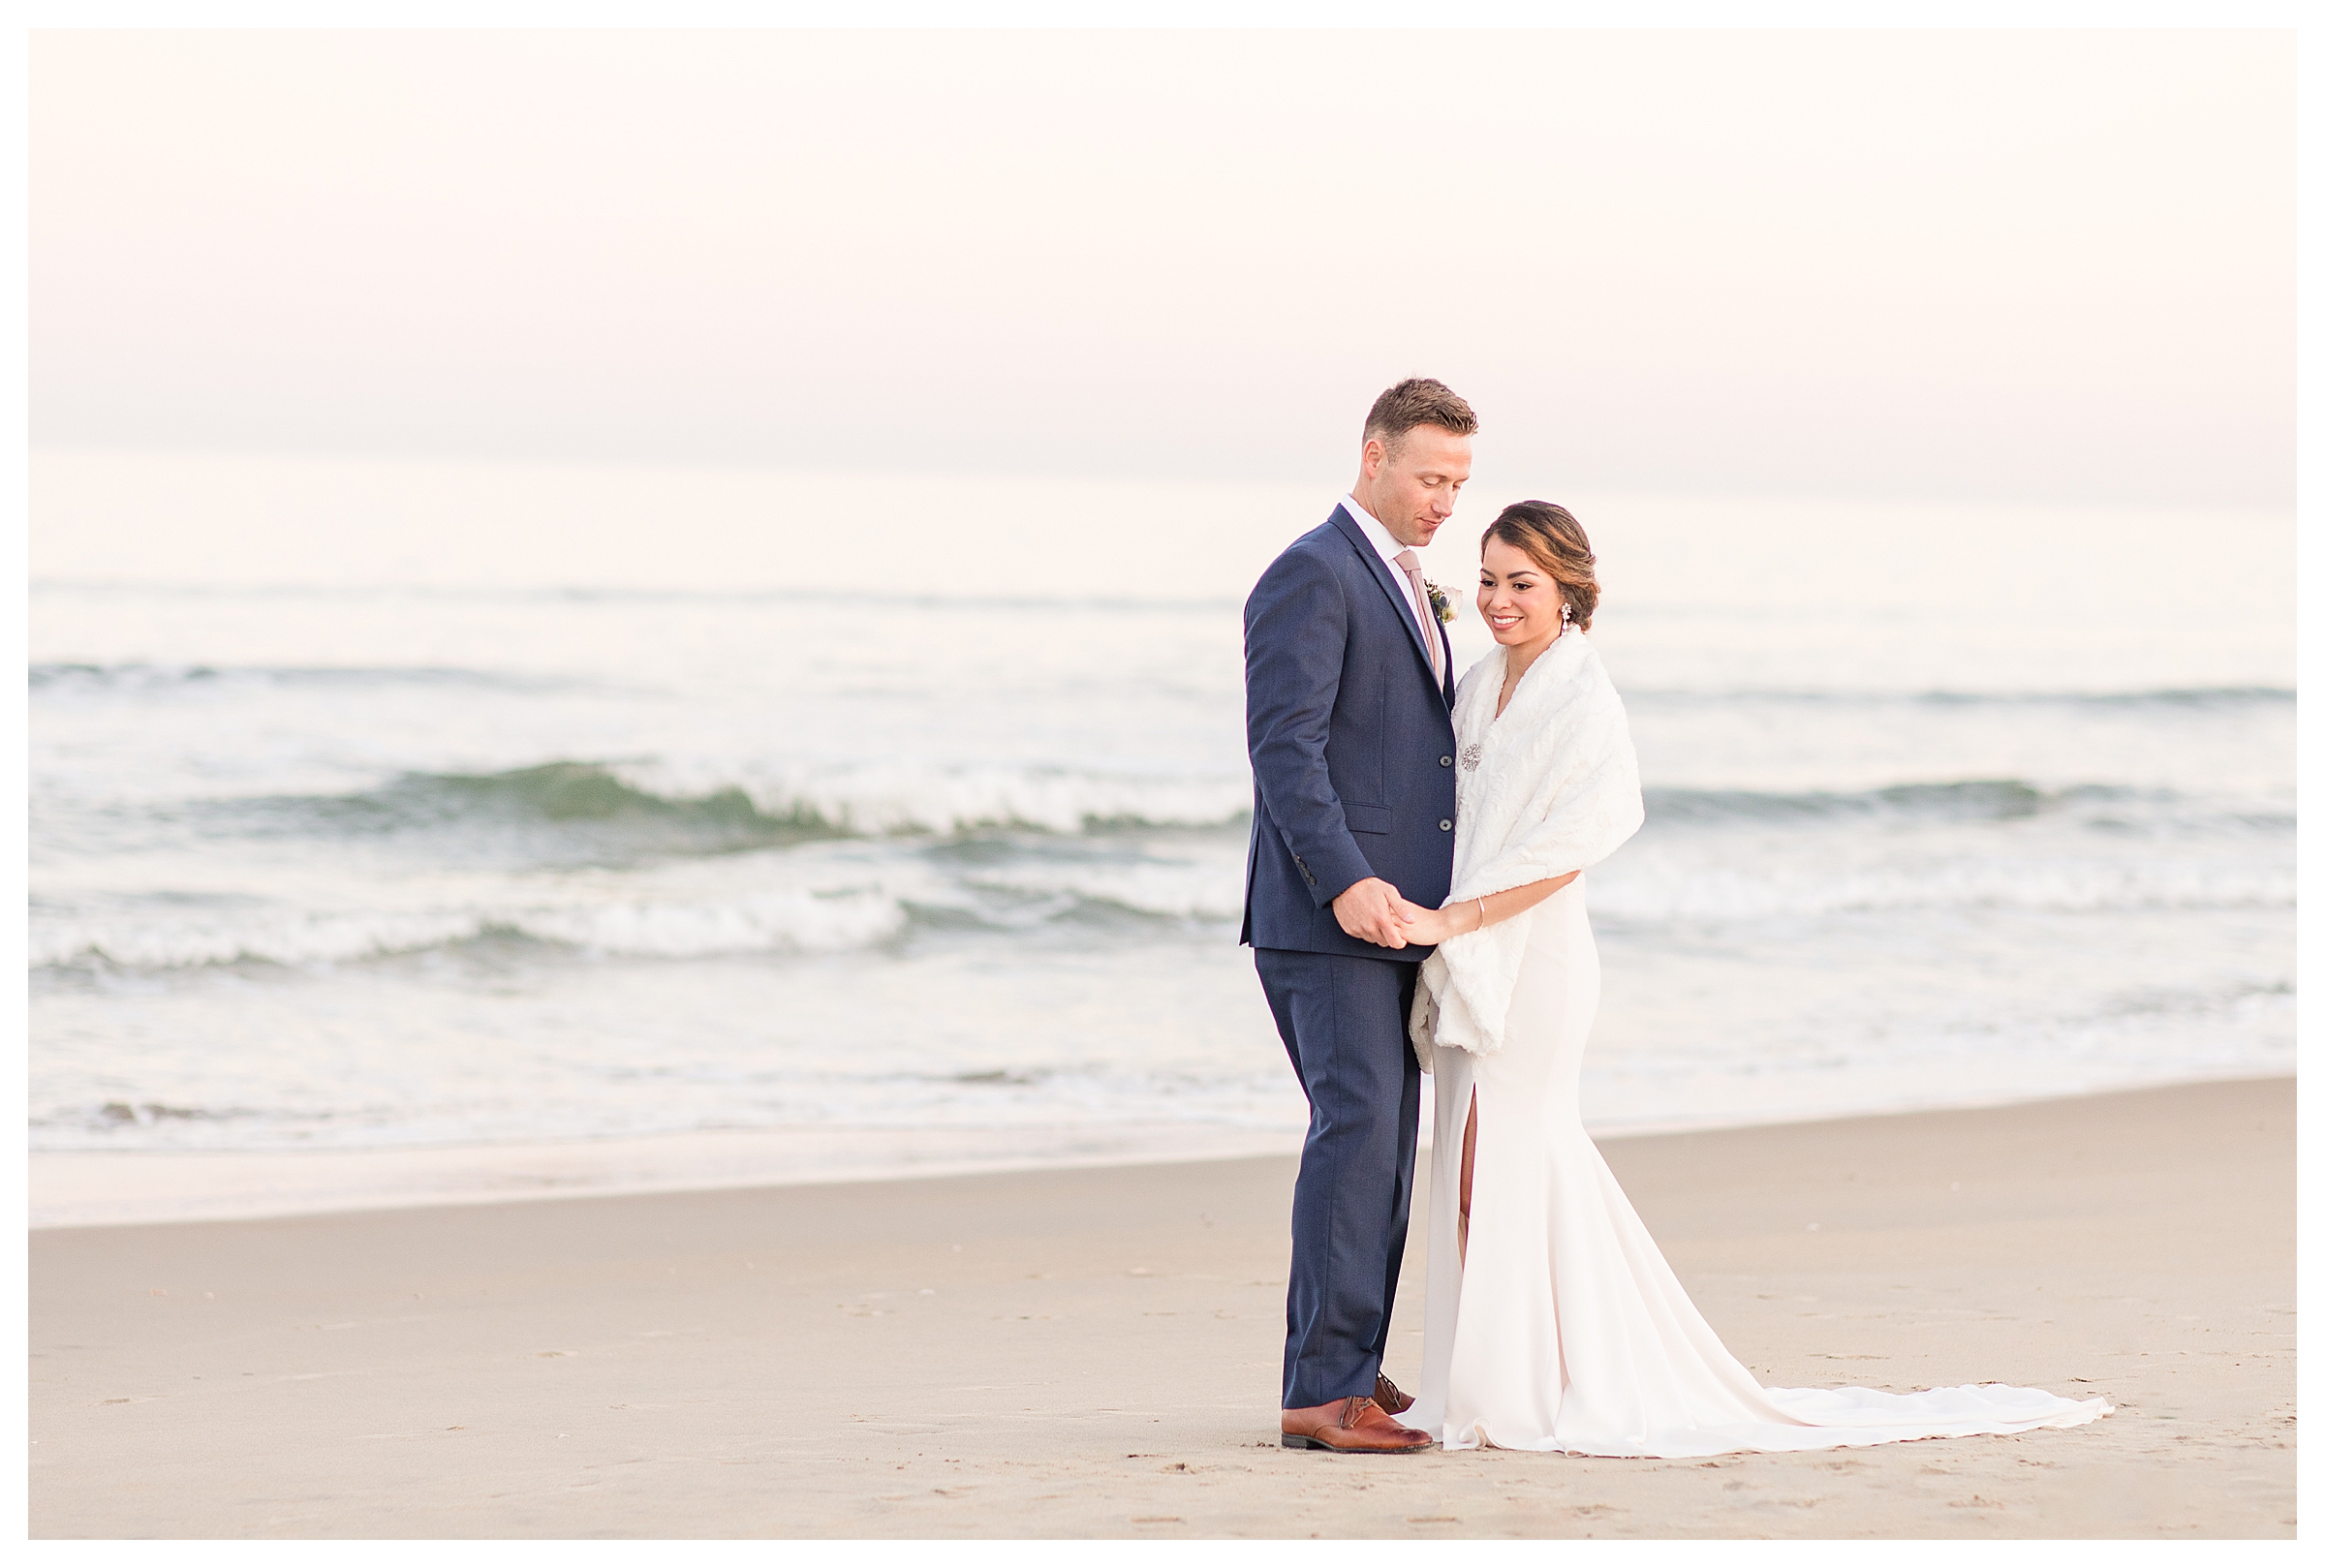 Bride and Groom on the beach with waves.